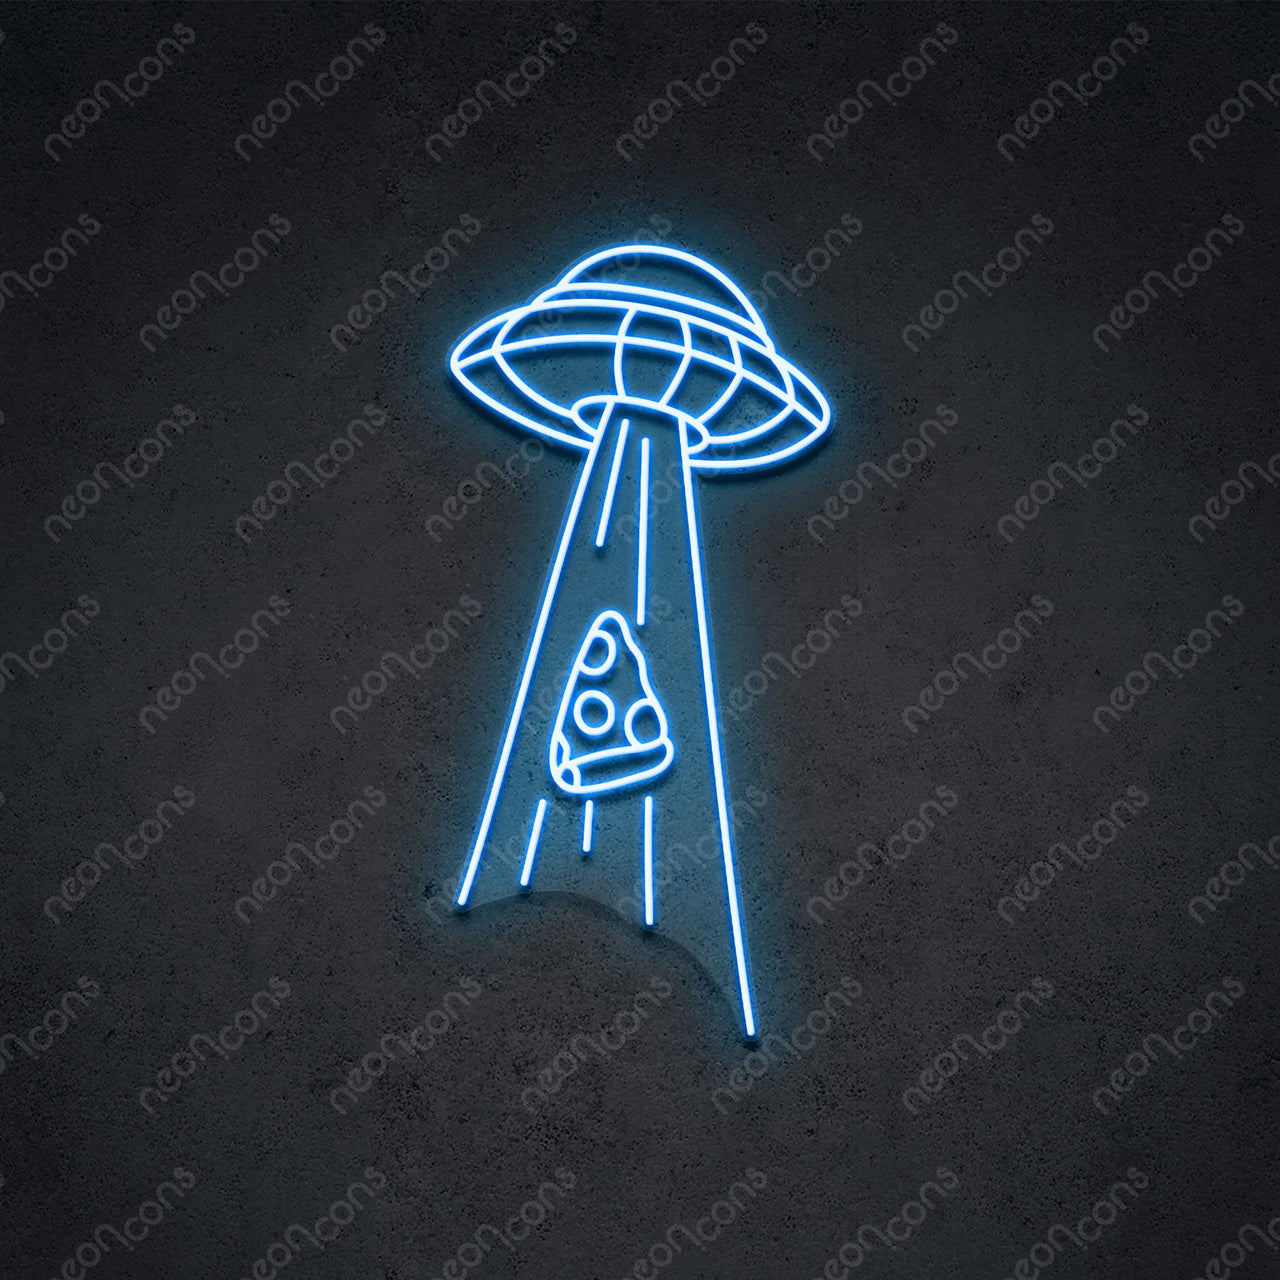 "Abducting Pizza" LED Neon